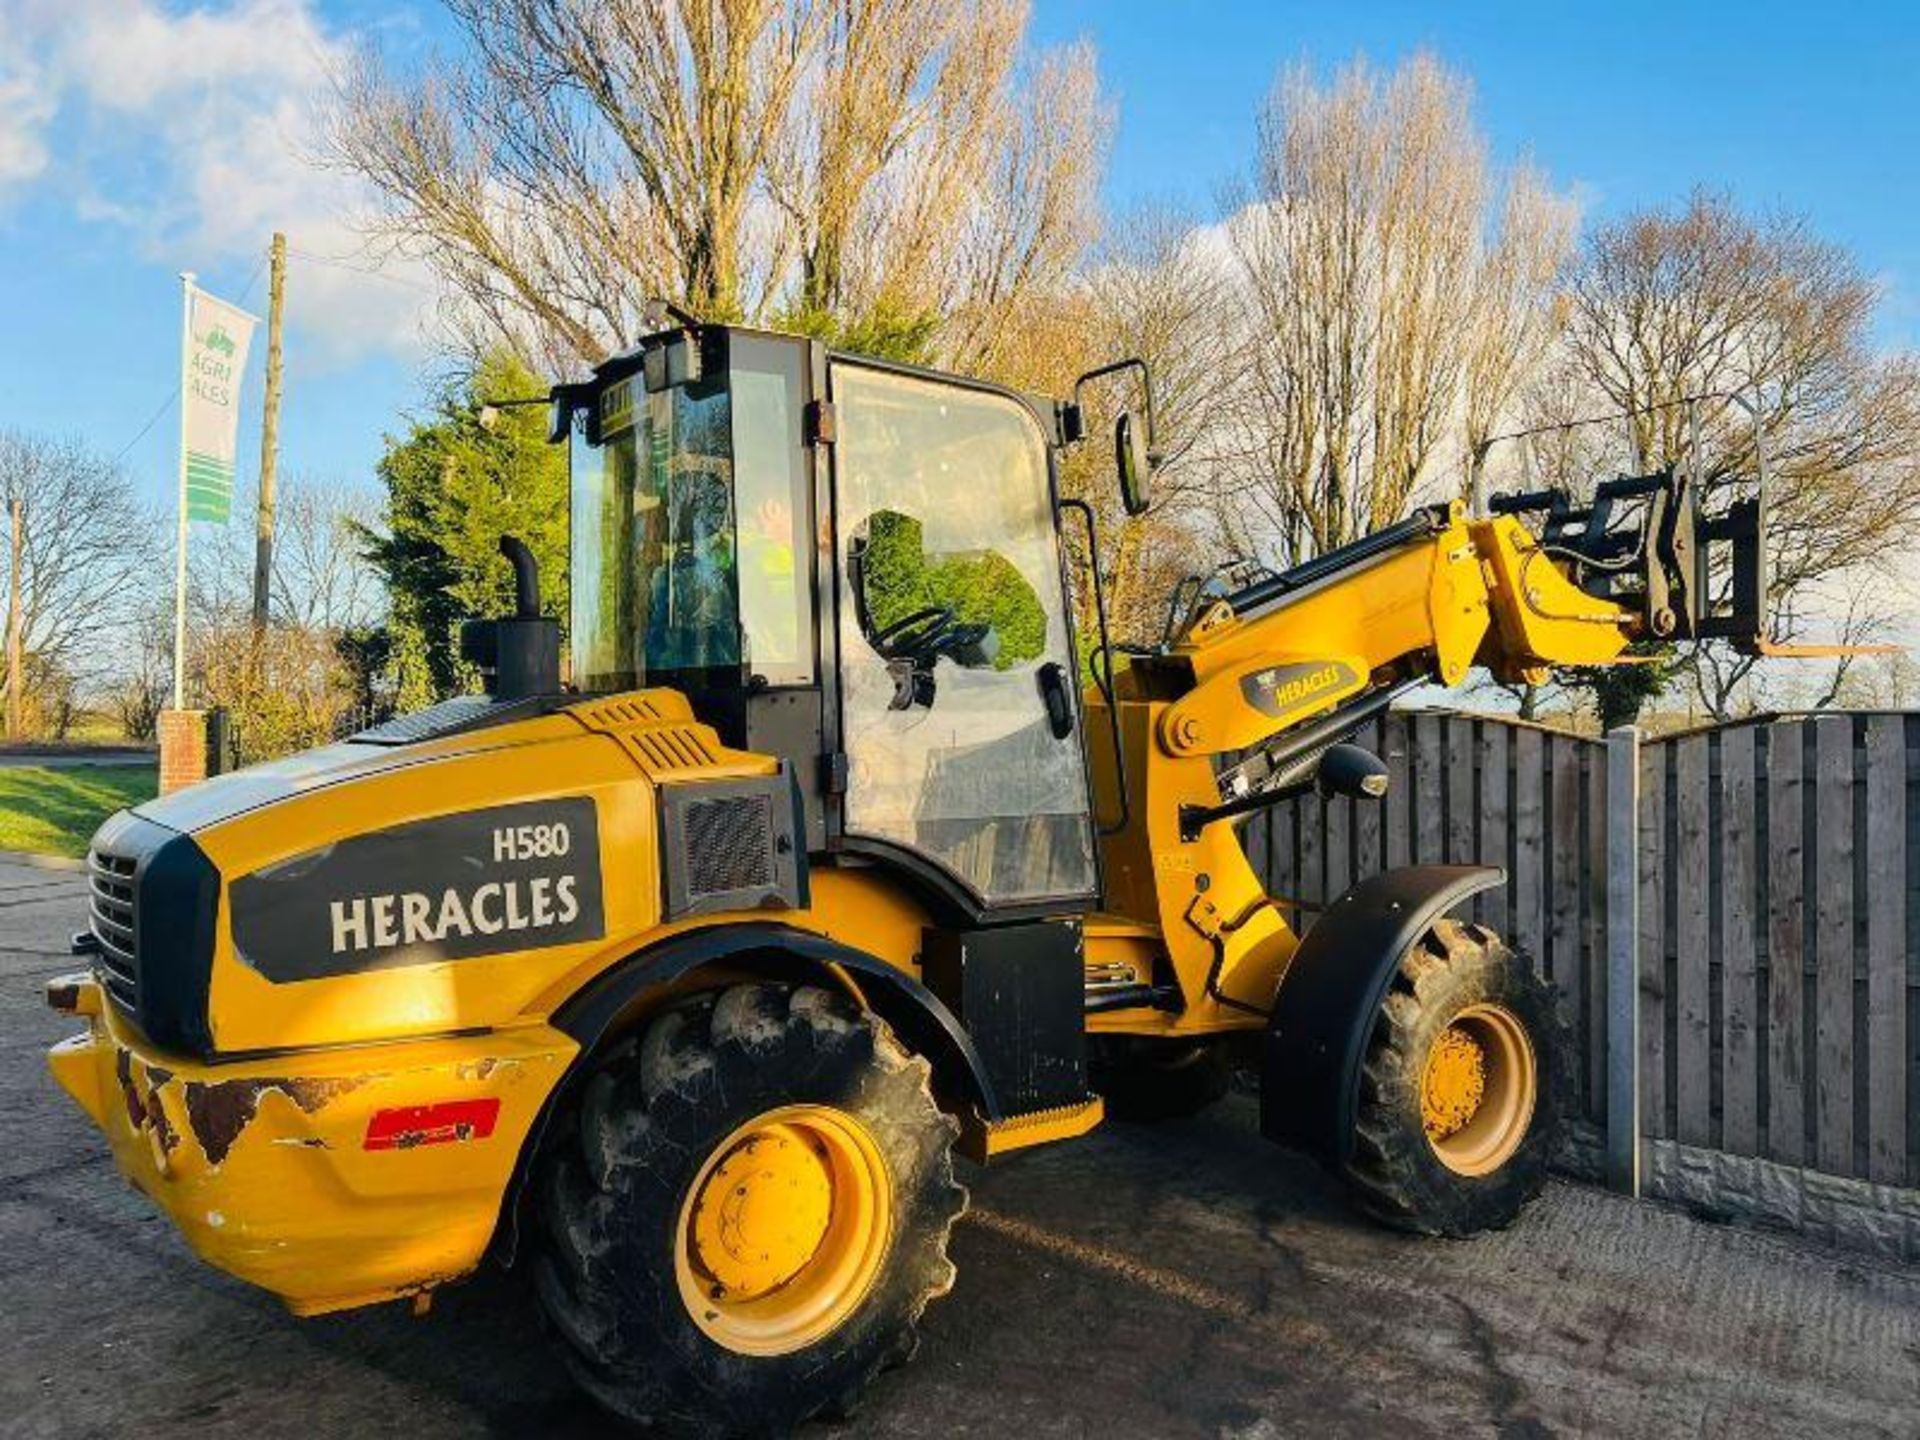 HERACLES H580 4WD TELEHANDLER * YEAR 2019 * C/W QUICK HITCH & PALLET TINES - Image 5 of 14